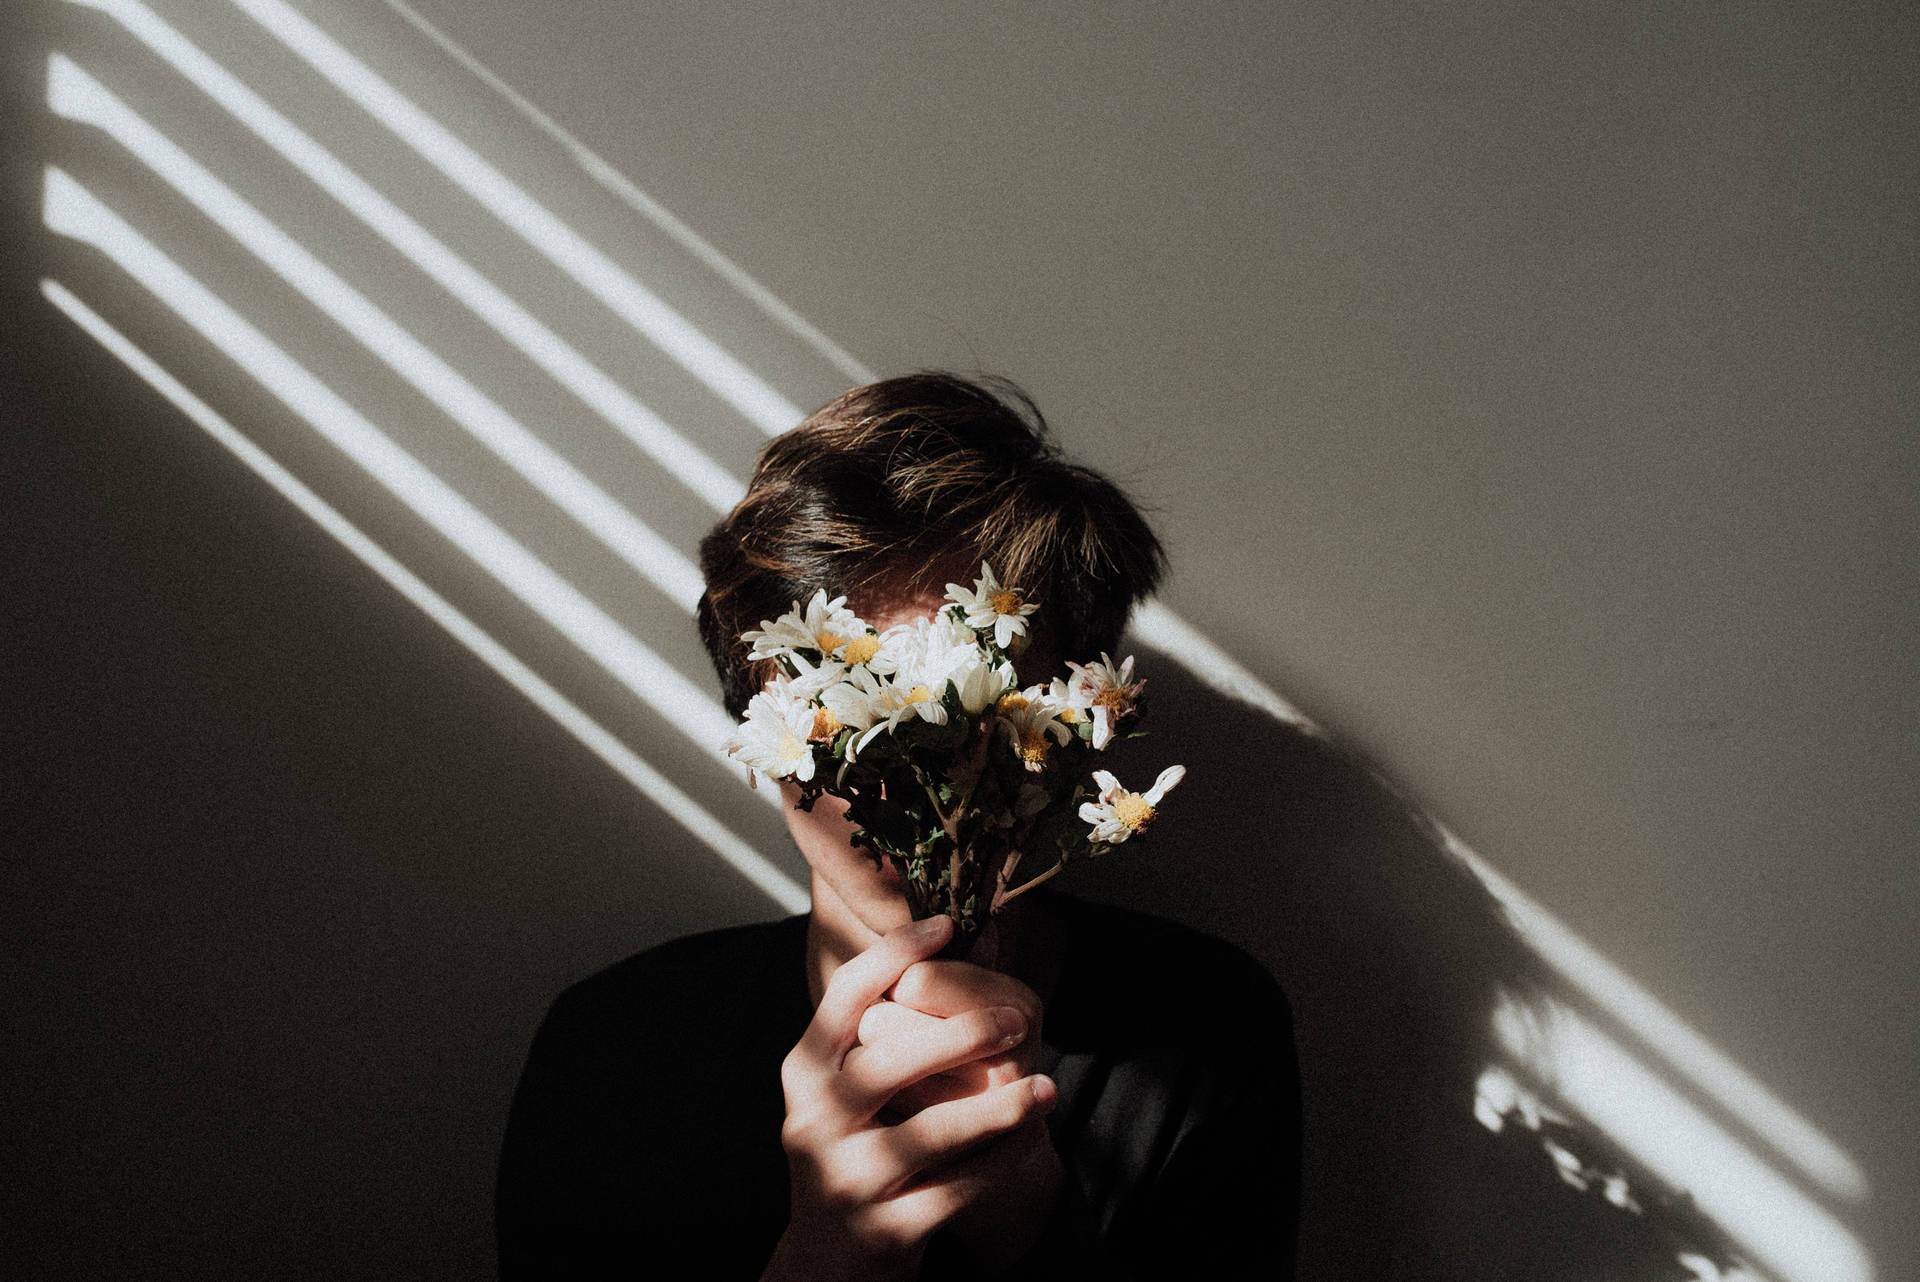 Aesthetic wallpaper of a photography of a man holding daisy flowers over his face. 